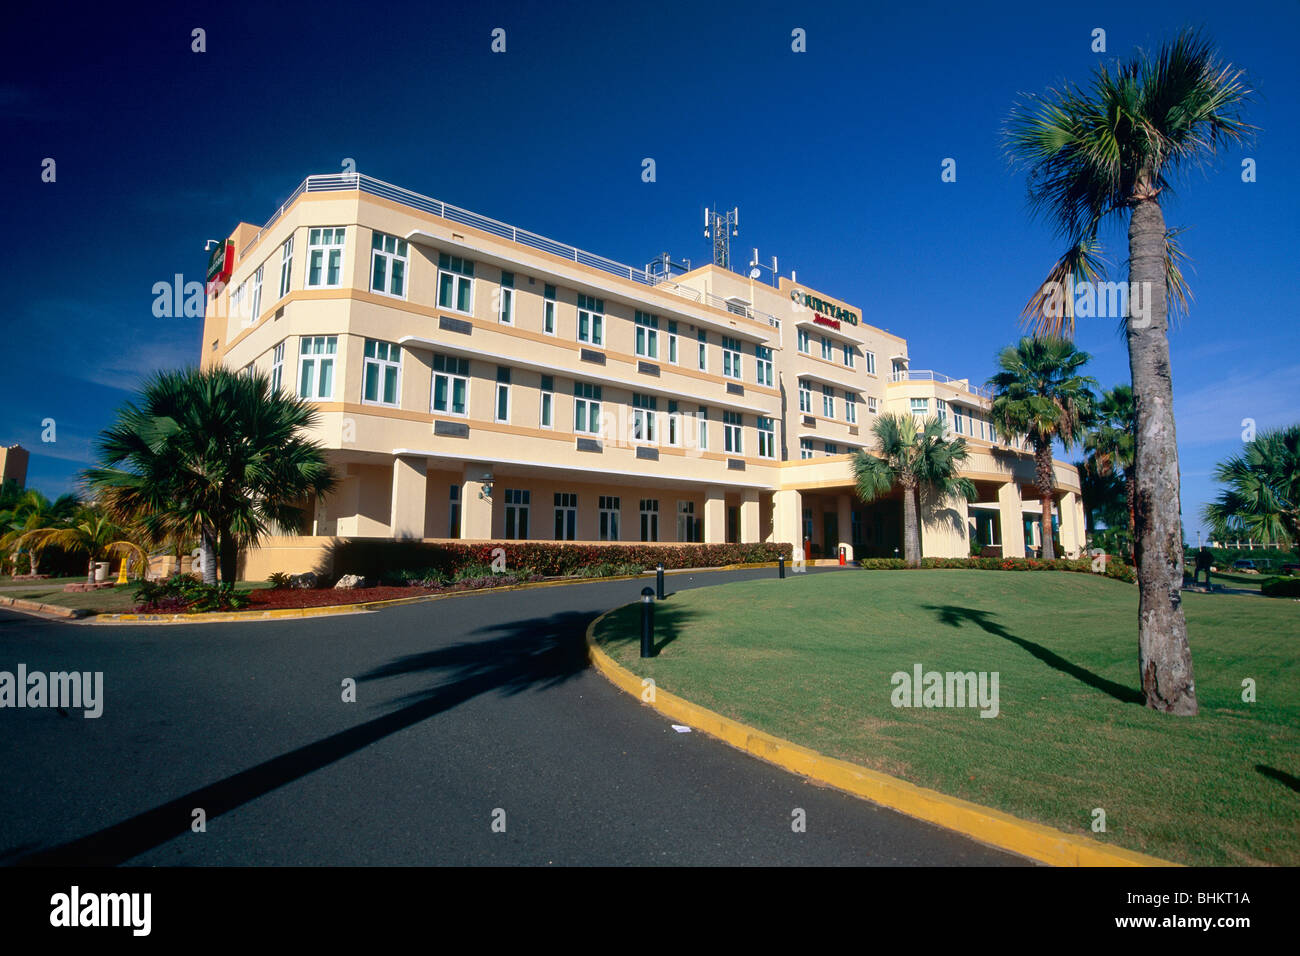 Low Angle View of the Marriott Courtyard Hotel Entrance, Aguadilla, Puerto Rico Stock Photo